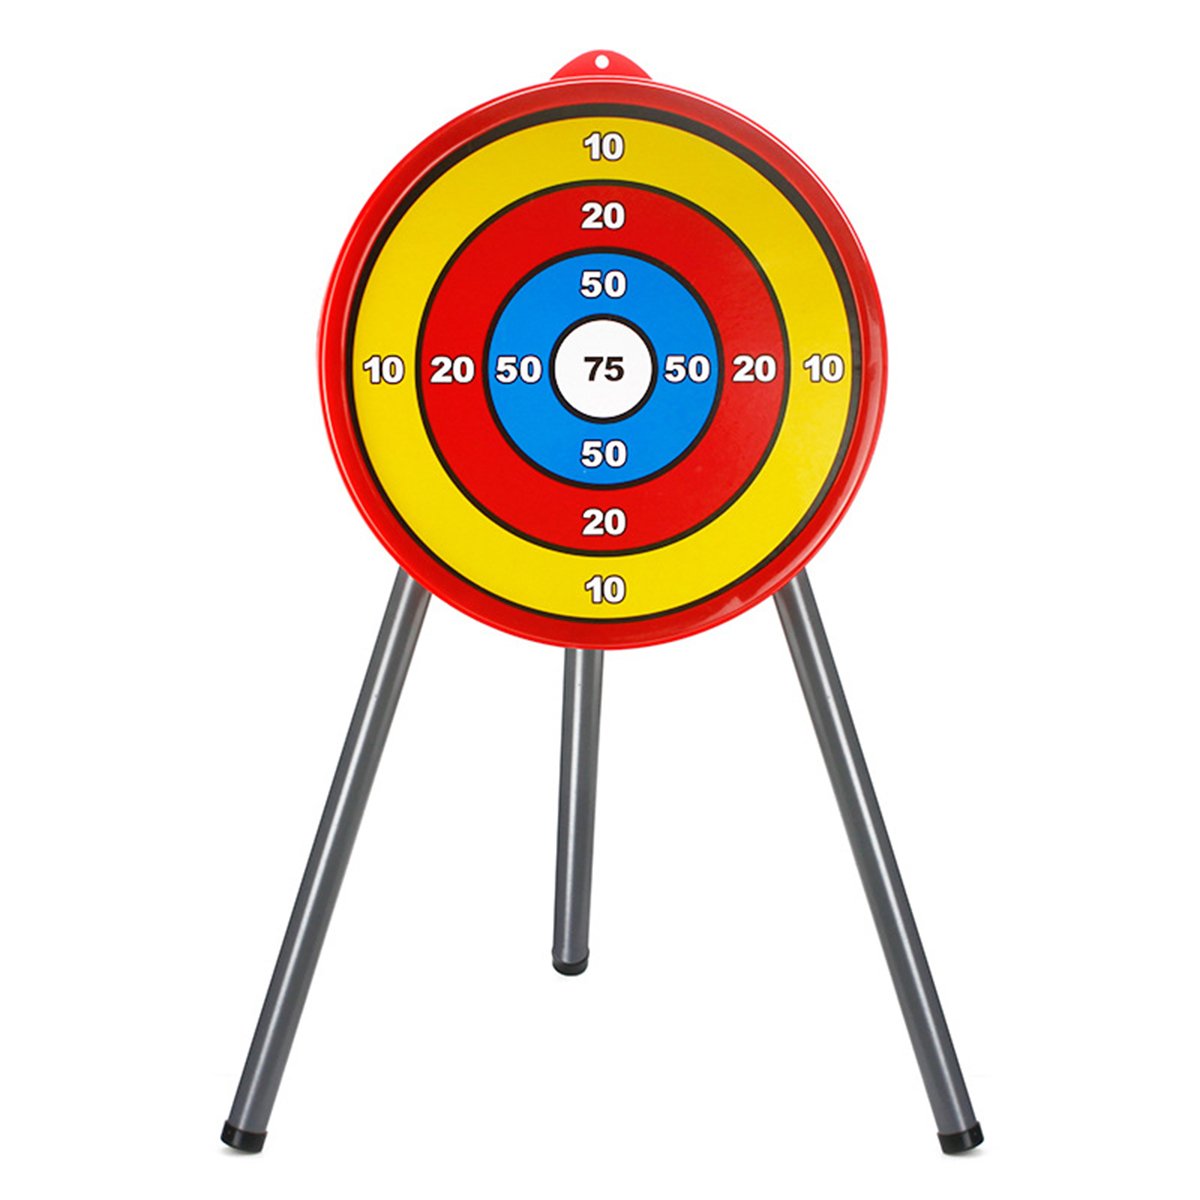 Classic Archery Shoot Game Set Develop Skill Novelties Toys for Young